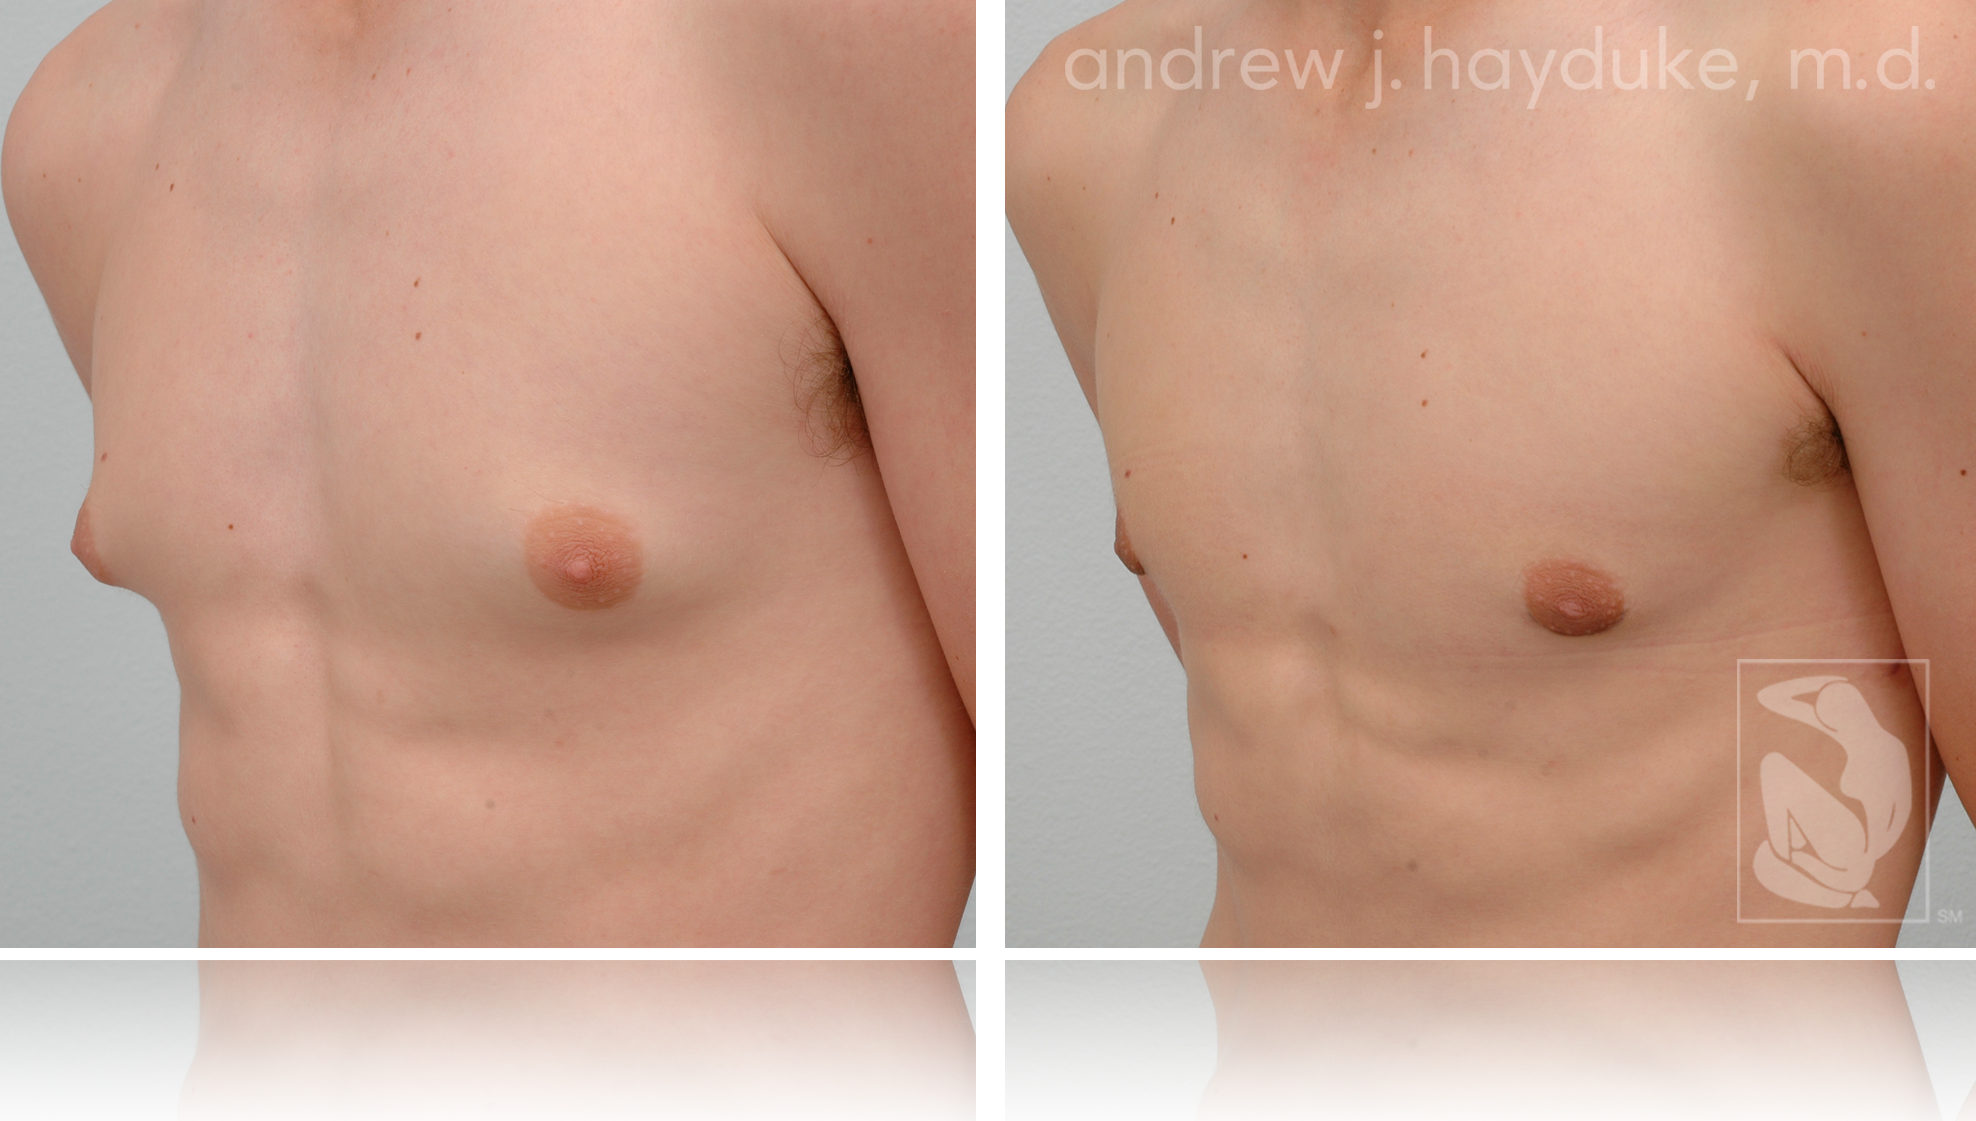 Are Male Breast Lumps Behind The Nipple A Sign Of Gynecomastia?